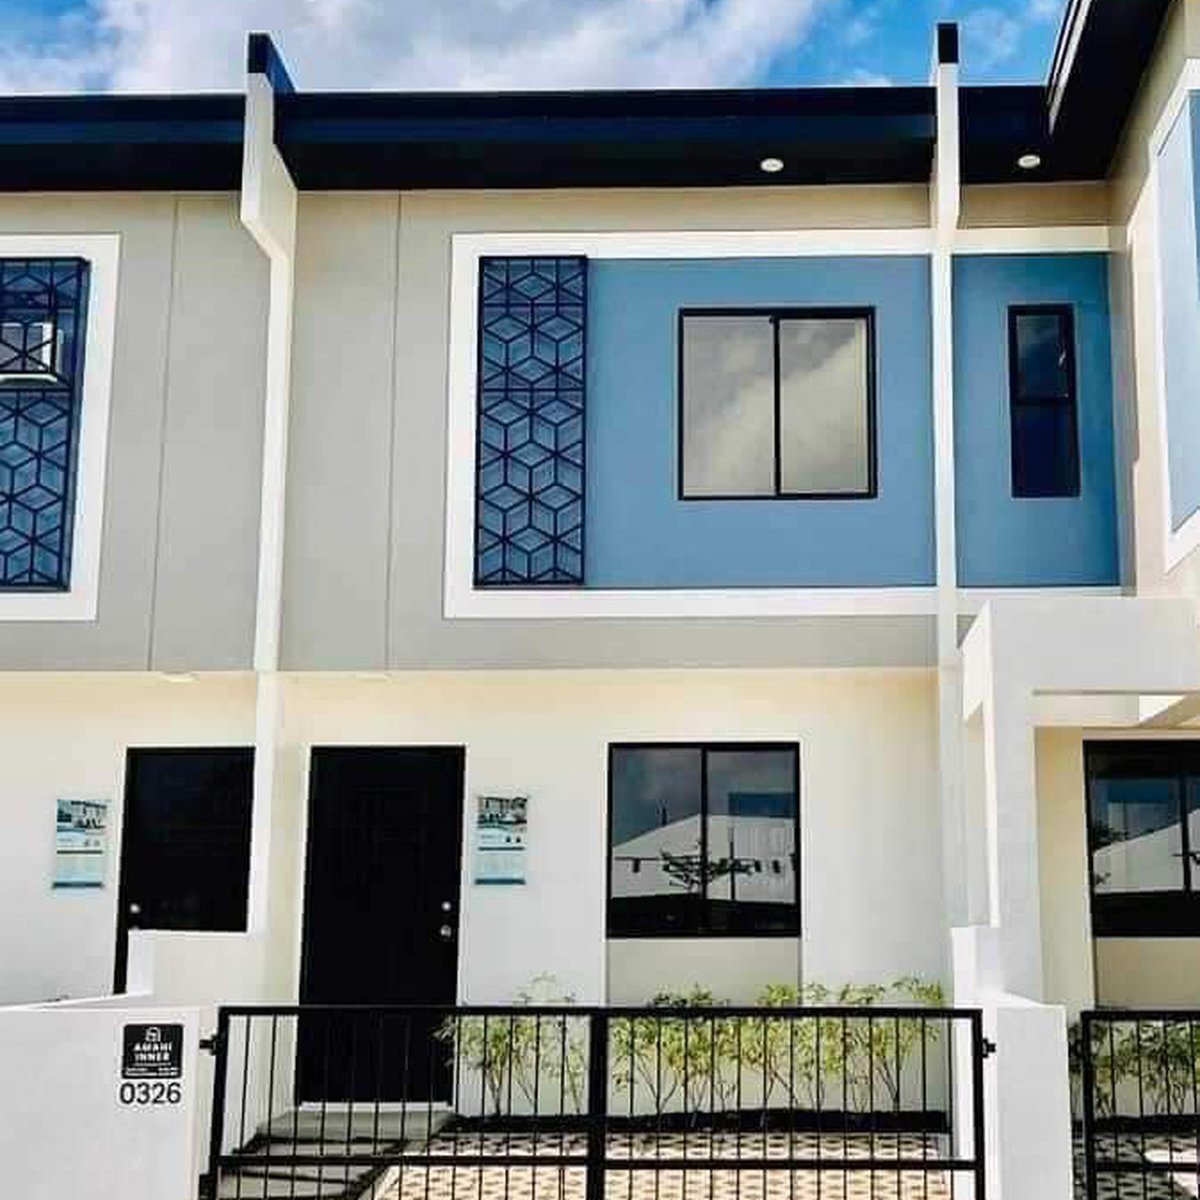 2 bedroom Townhouse For Sale In Lipa Batangas